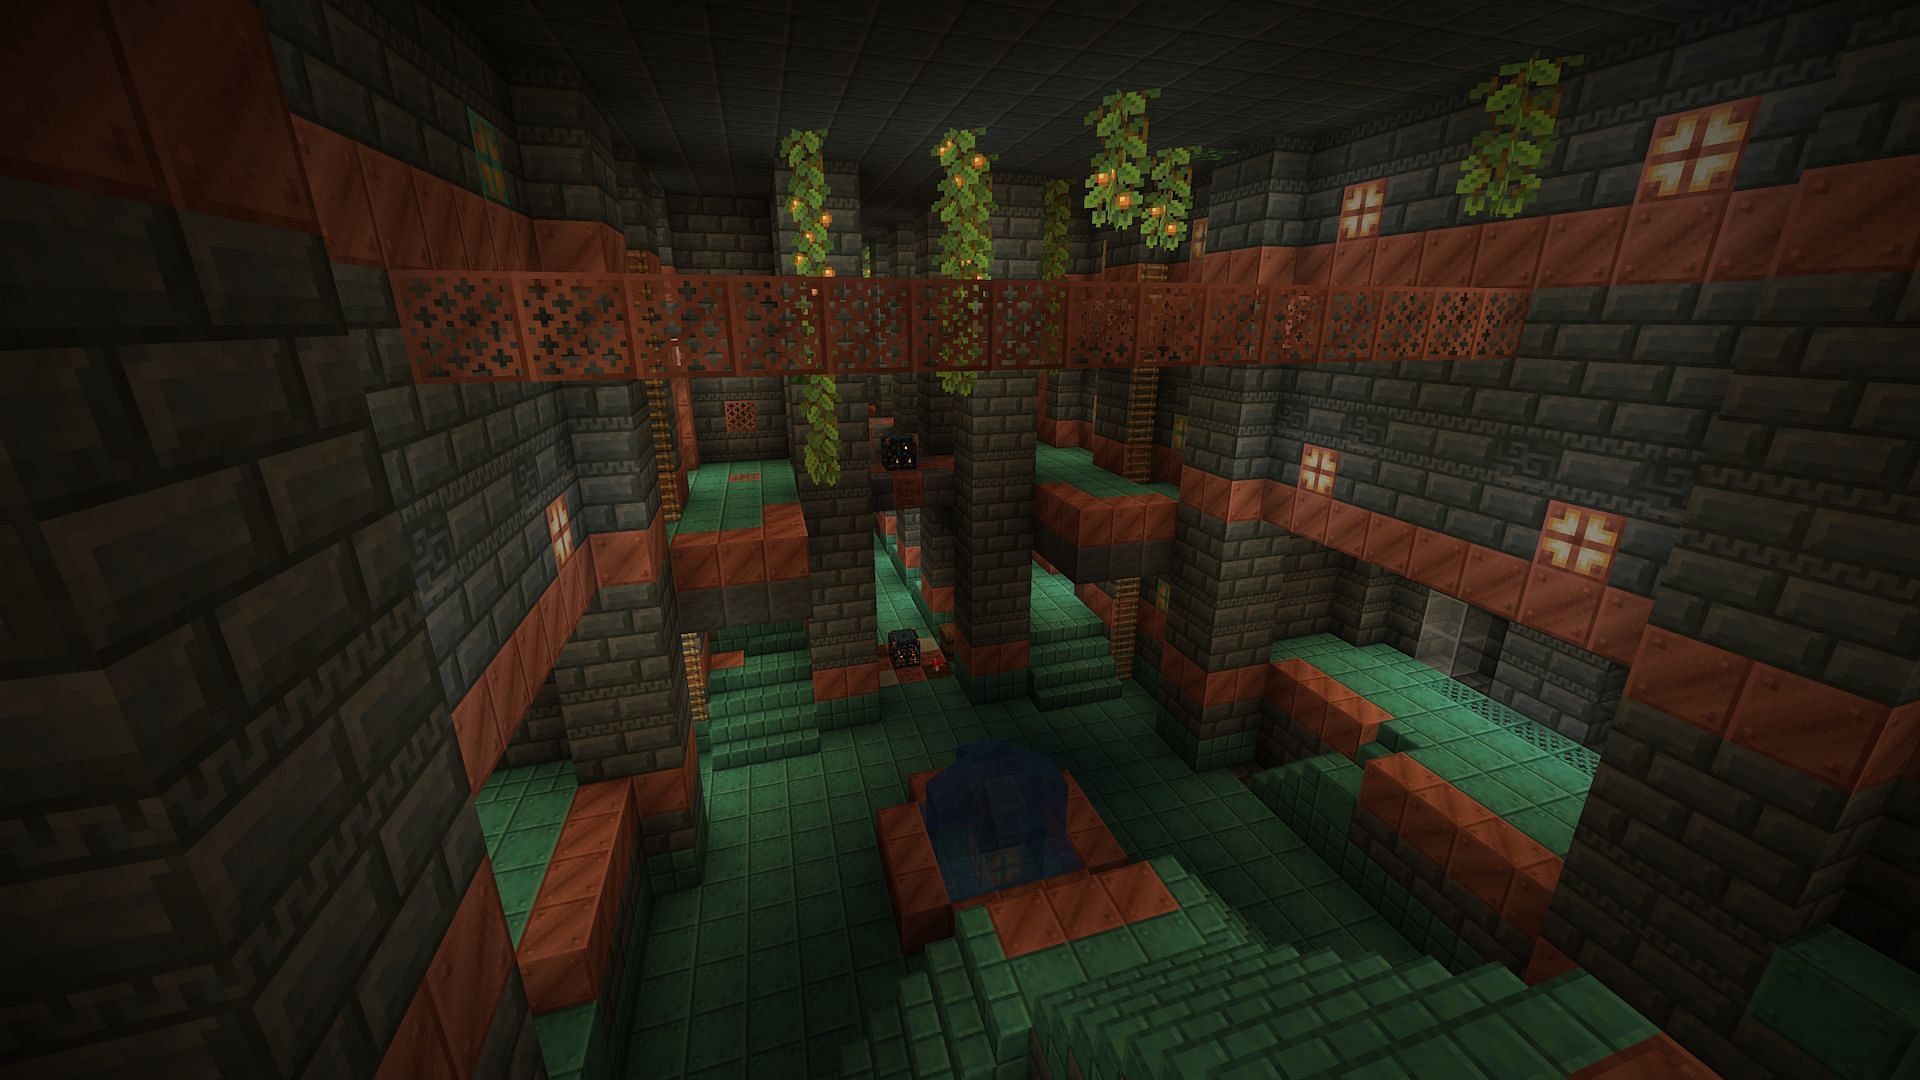 Trial chambers are amazing for seeing most of the current experimental content (Image via Mojang)